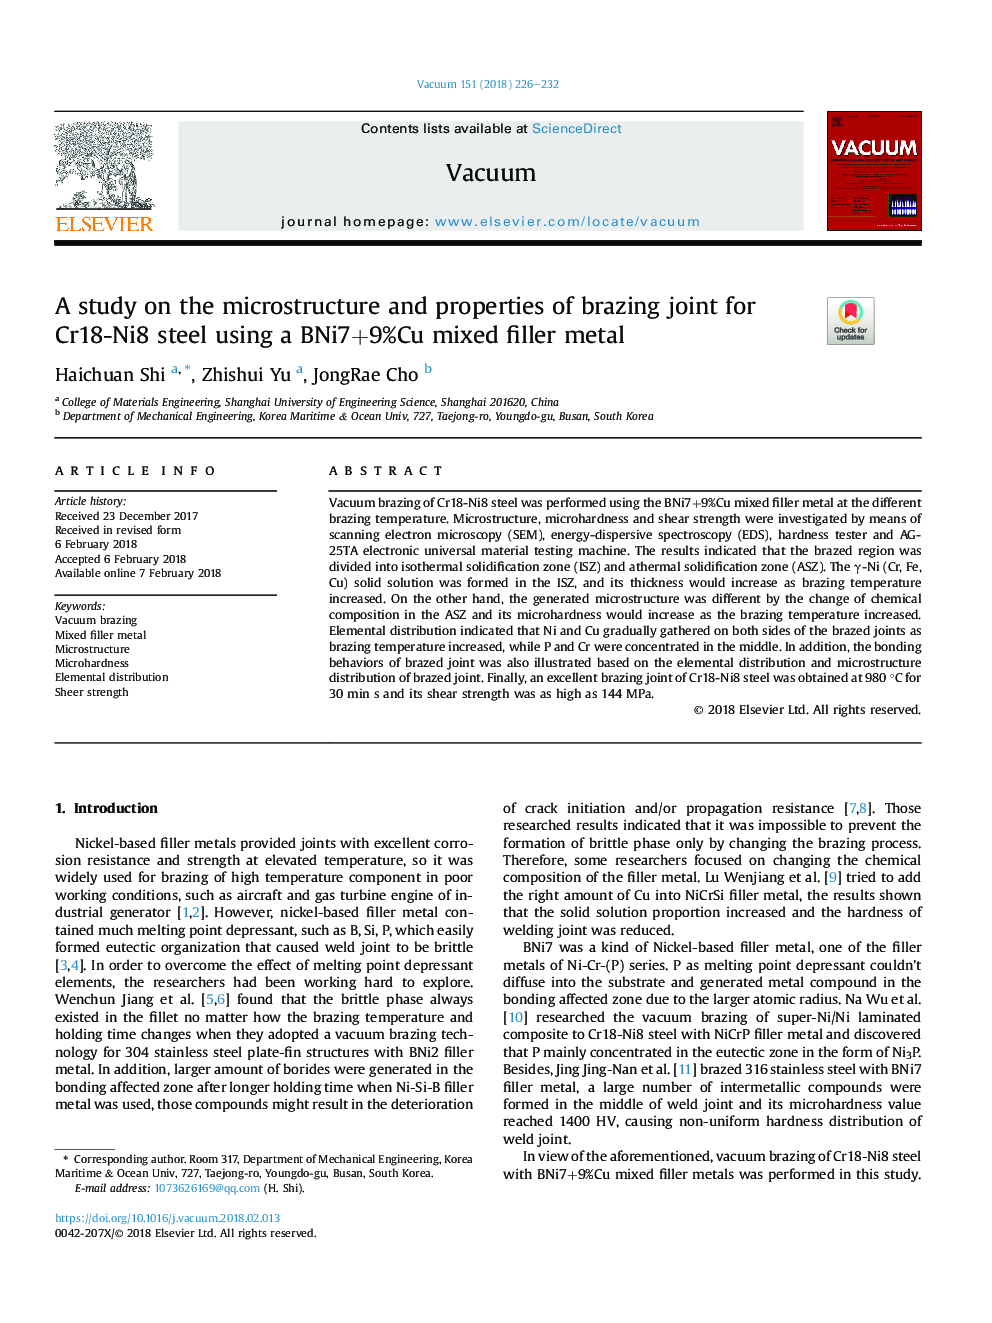 A study on the microstructure and properties of brazing joint for Cr18-Ni8 steel using a BNi7+9%Cu mixed filler metal